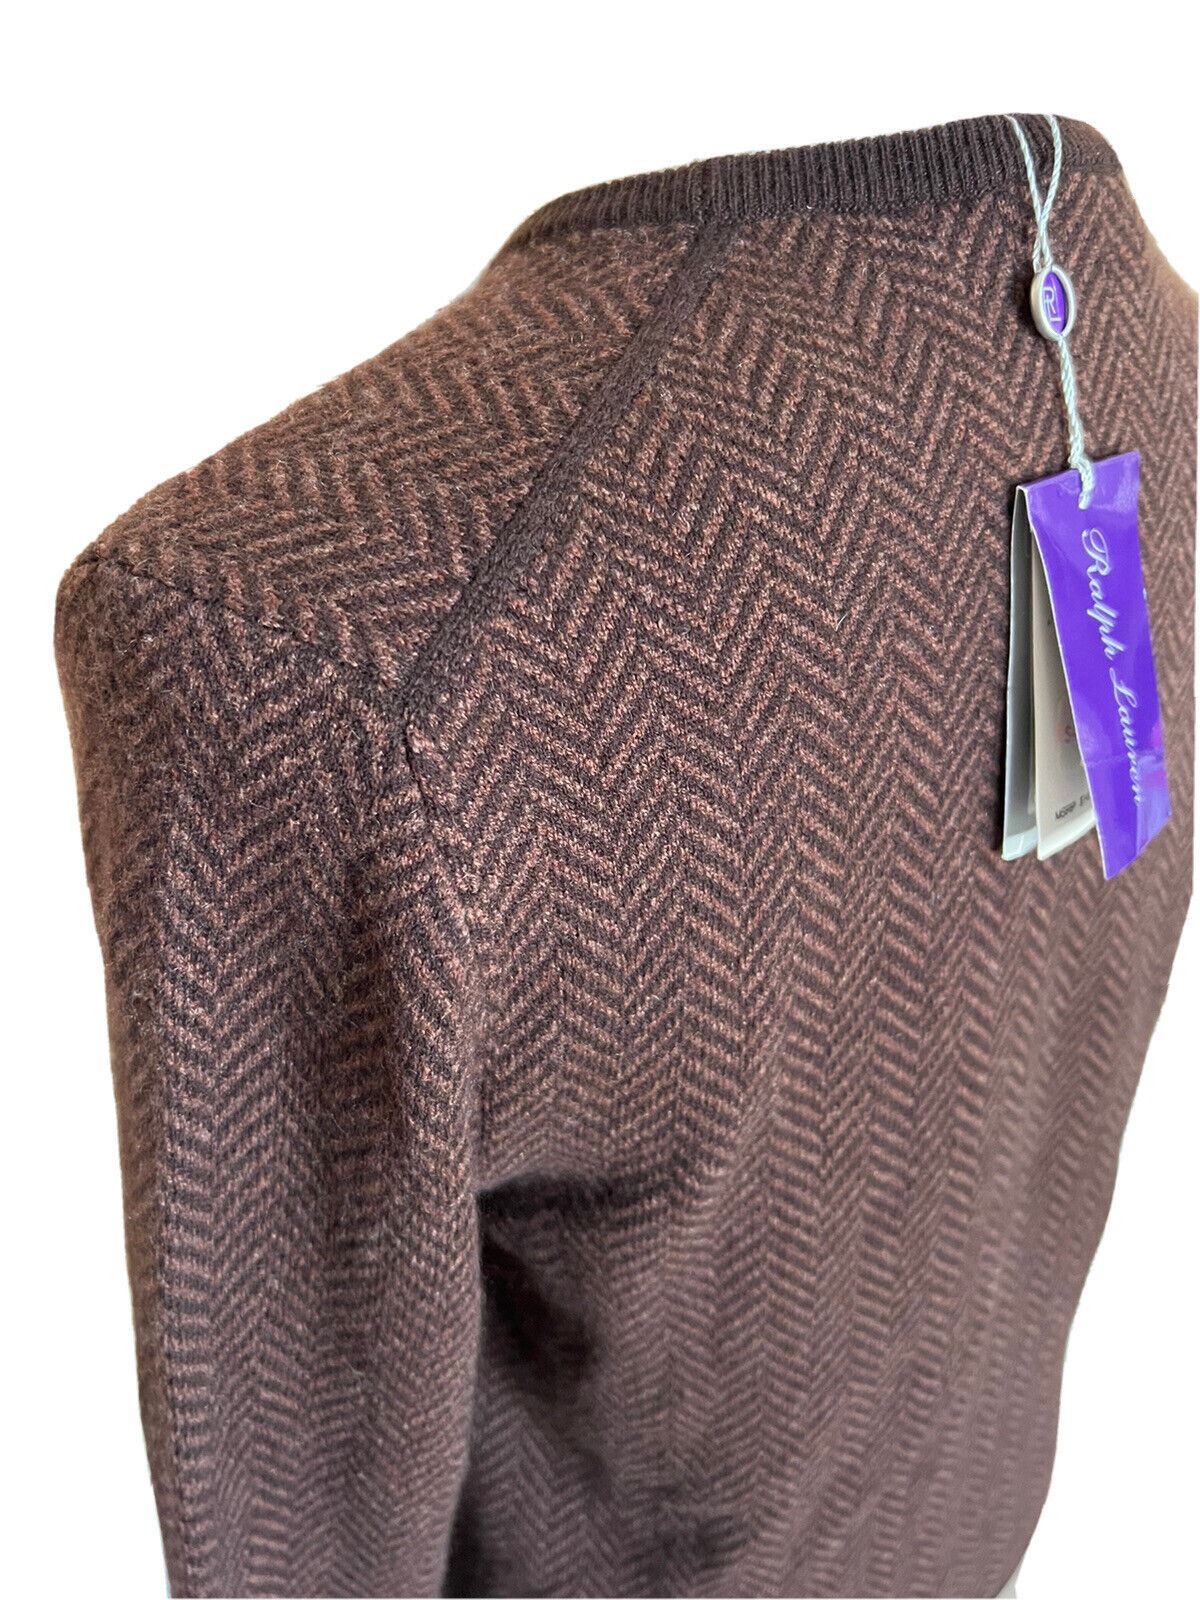 NWT $1495 Ralph Lauren Purple Label Cashmere Brown Sweater XL Made in Italy